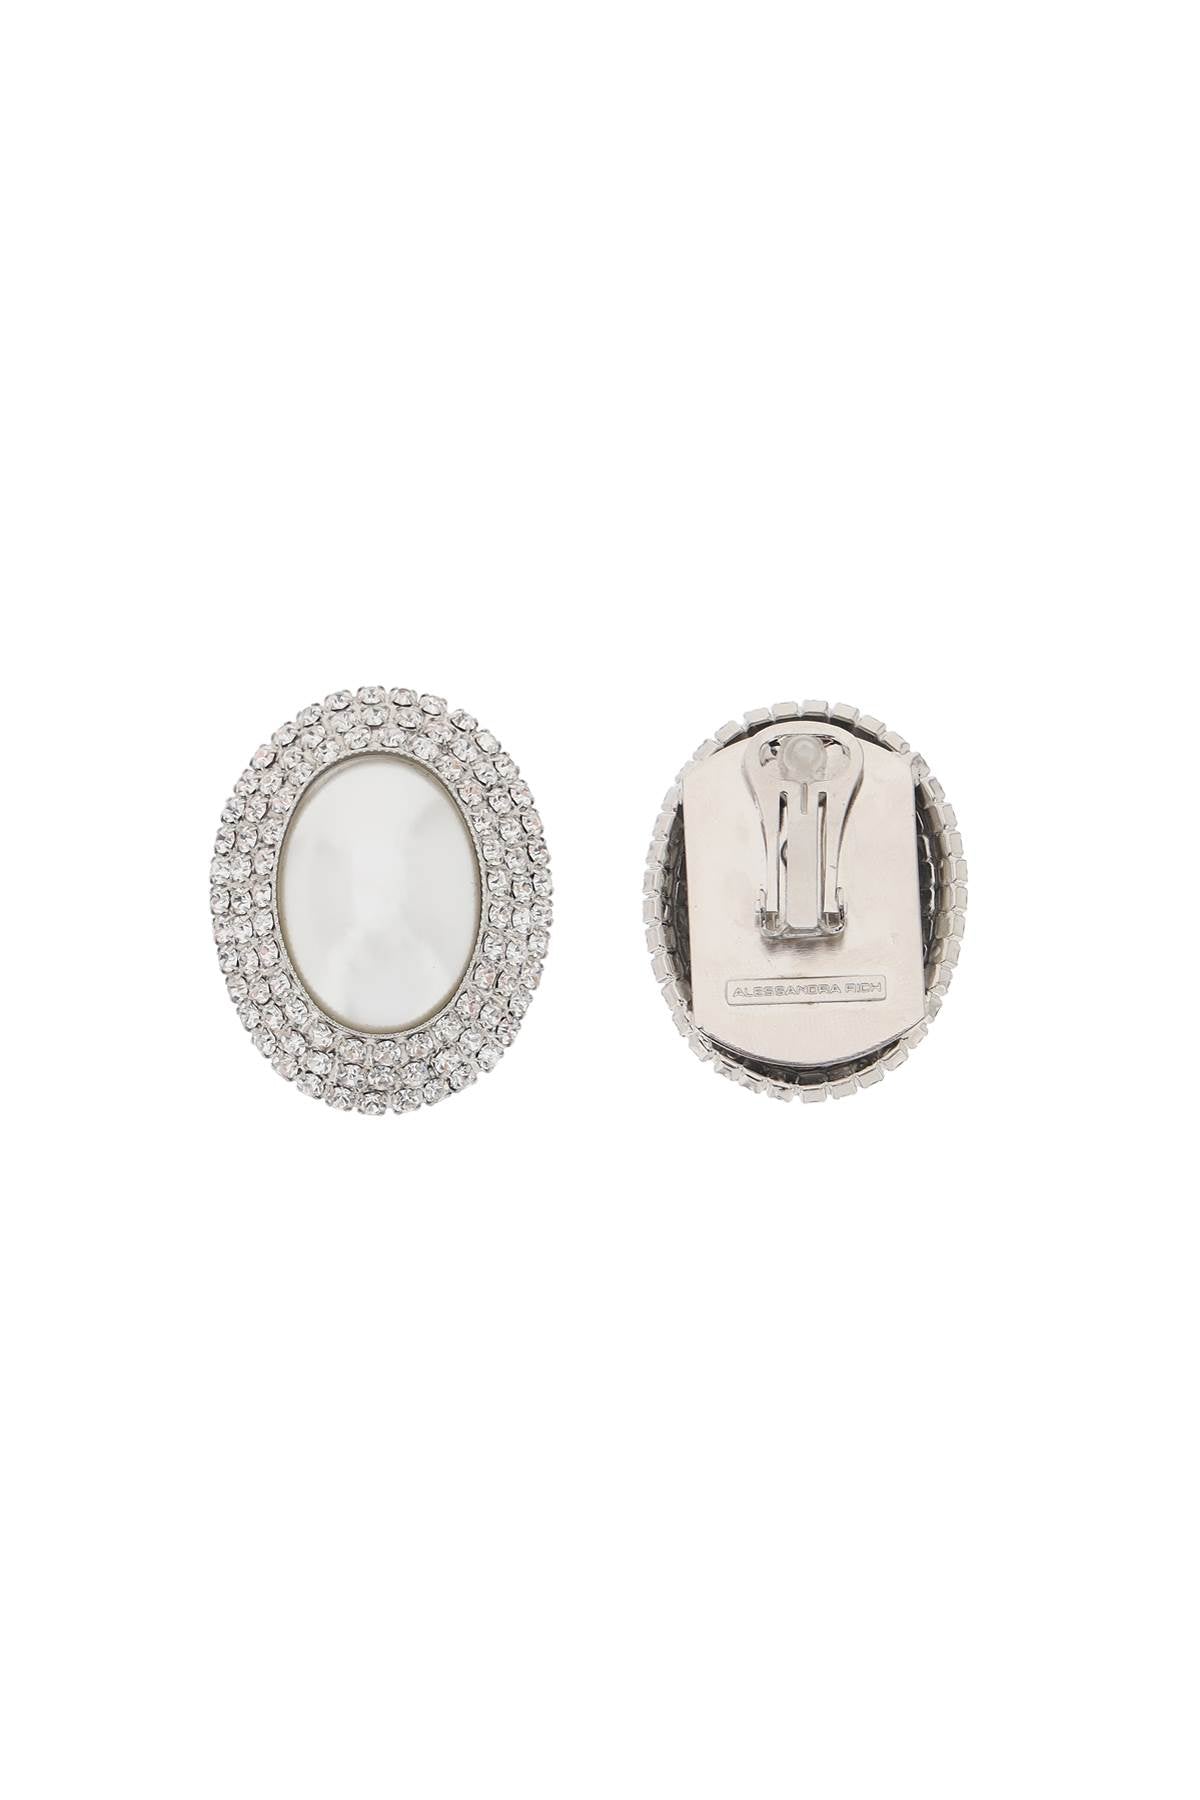 Alessandra Rich Alessandra rich oval earrings with pearl and crystals